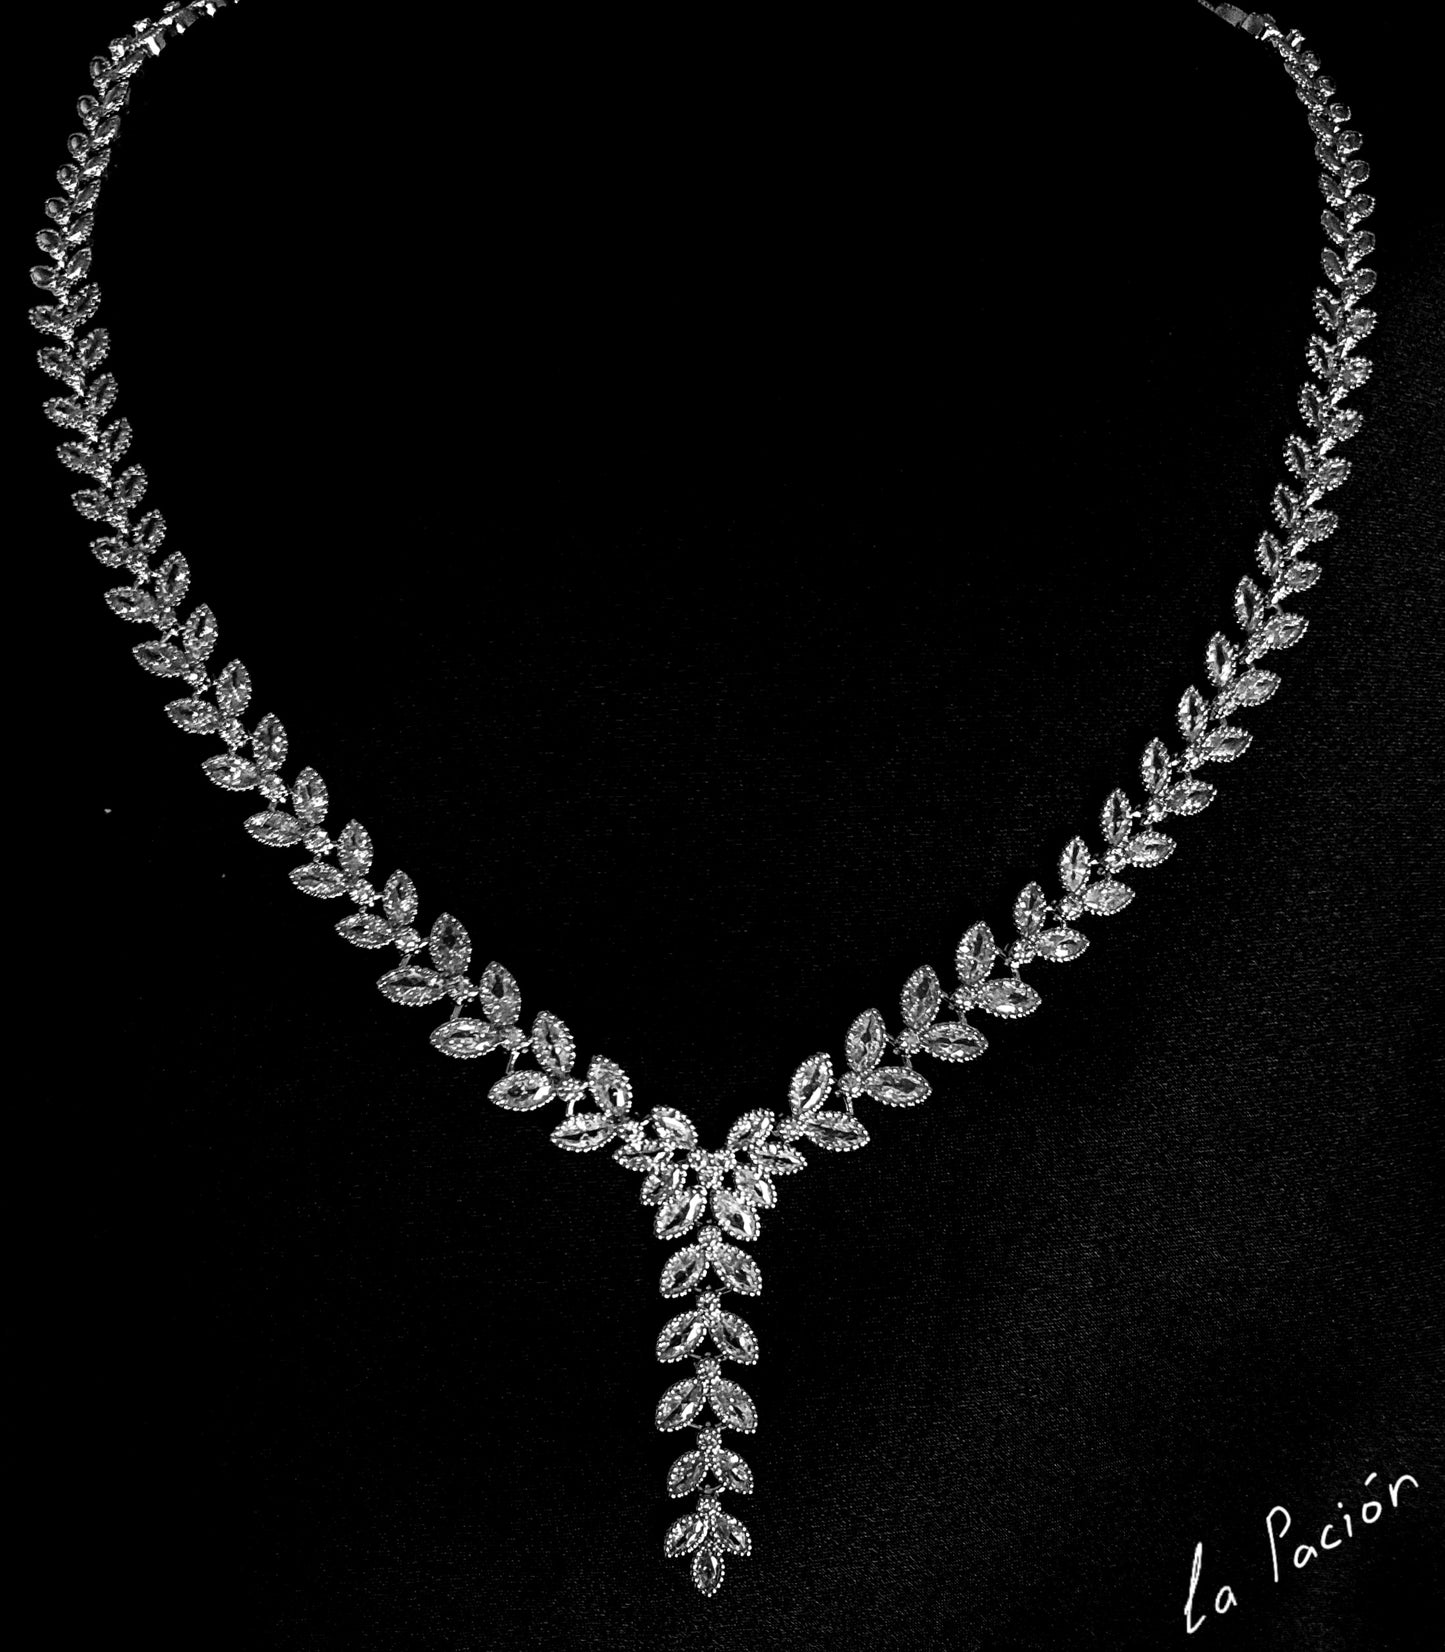  silver necklace sparkling with zirconia Diamonds displayed on a black background.